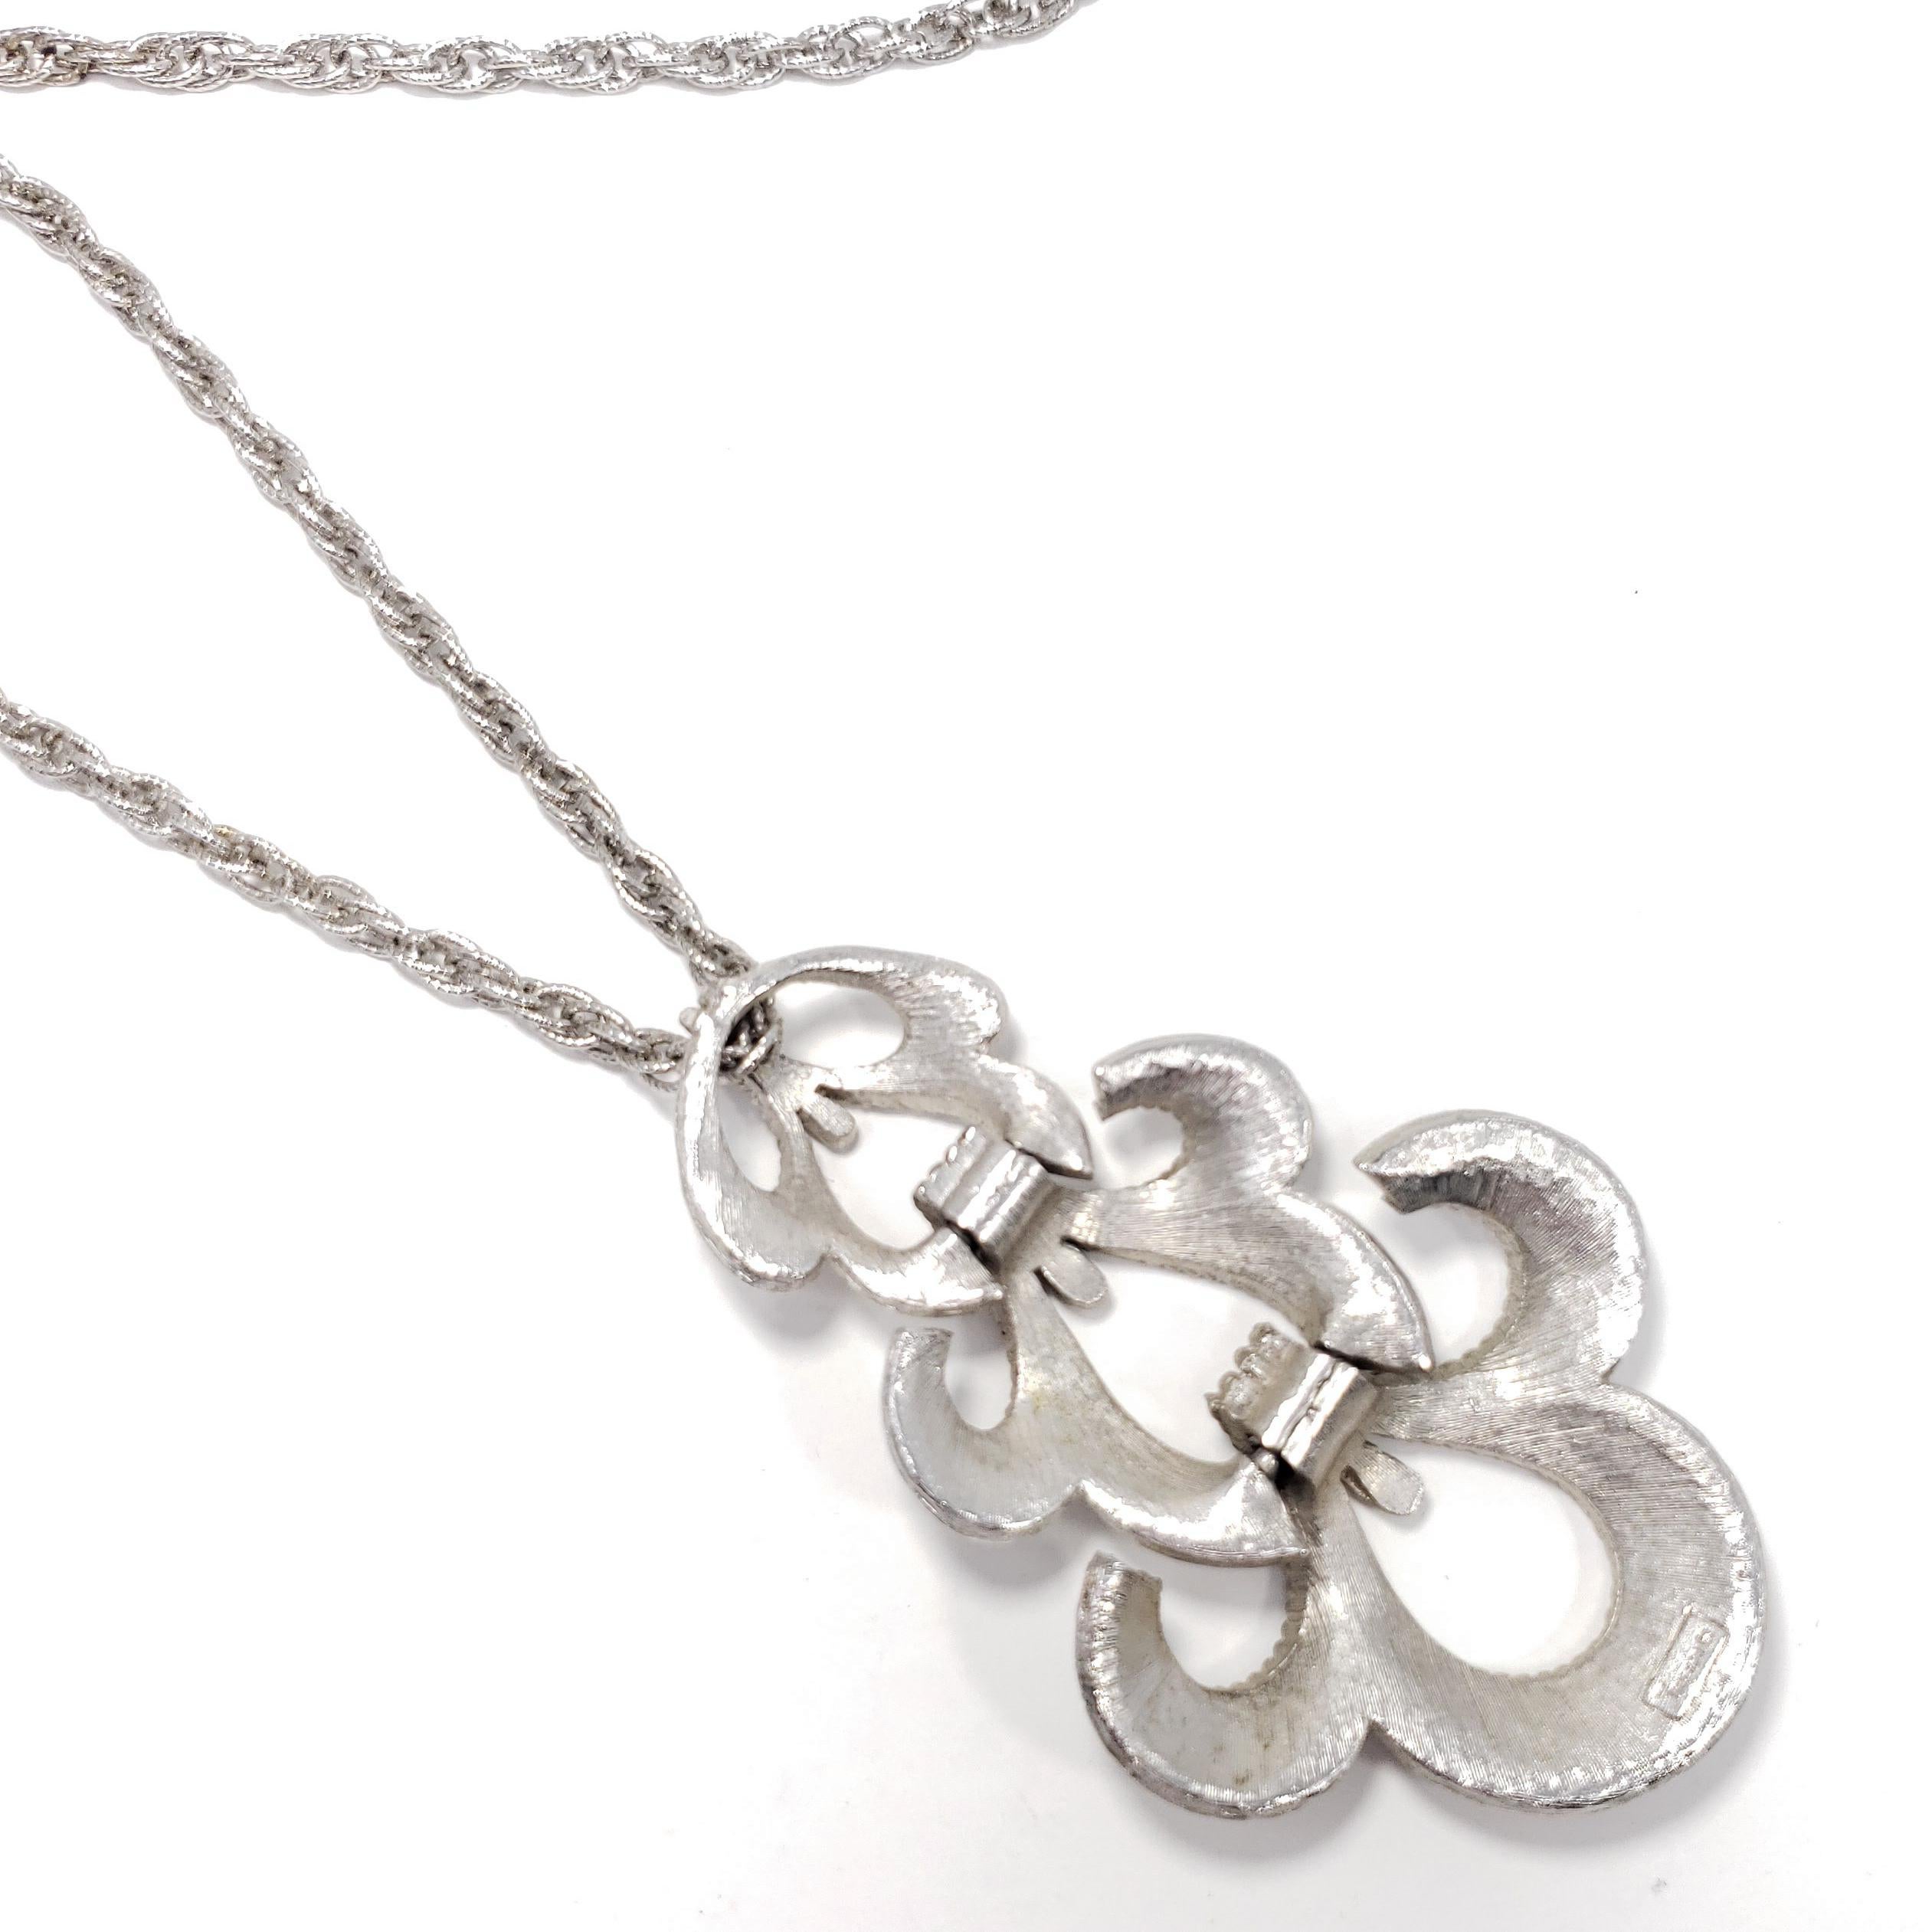 Victorian-inspired vintage silver pendant necklace by Trifari. An exquisite segmented floral-design pendant hangs off a stylish silver chain.

Silver-tone. 28 inch necklace length. Pendant 3.25 inches by 1.75 inches.

Marks / hallmarks / etc: Trifari